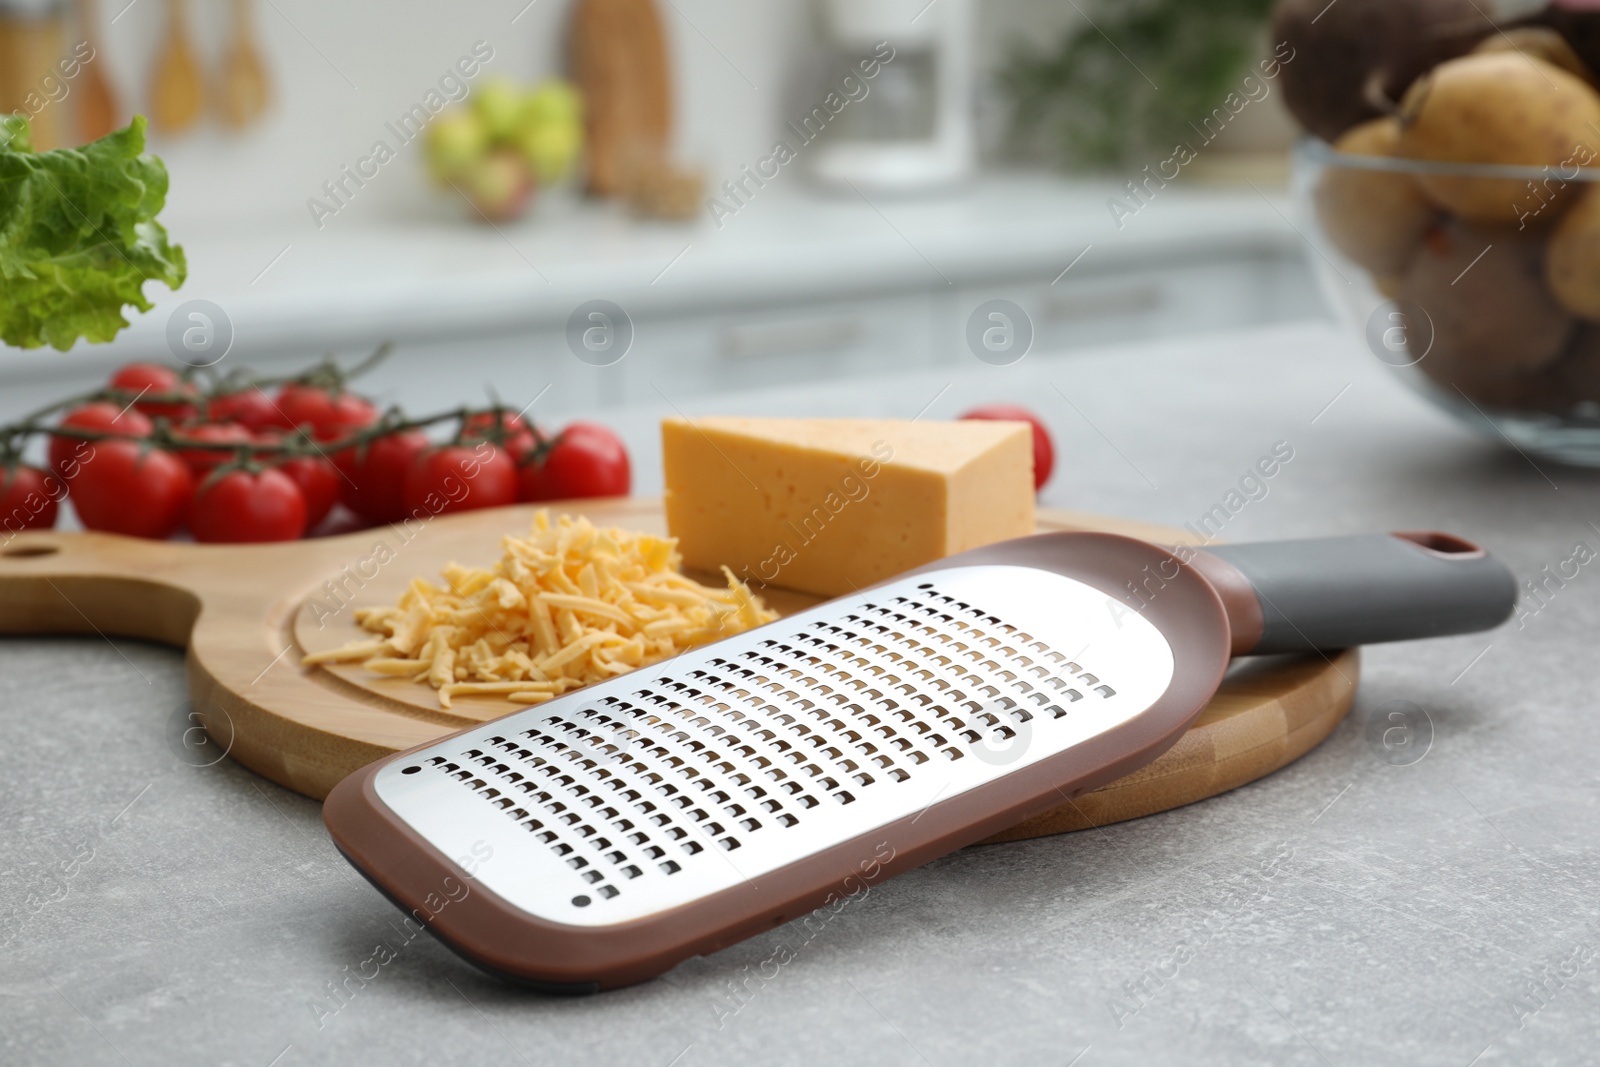 Photo of Grater and cheese on grey table in kitchen